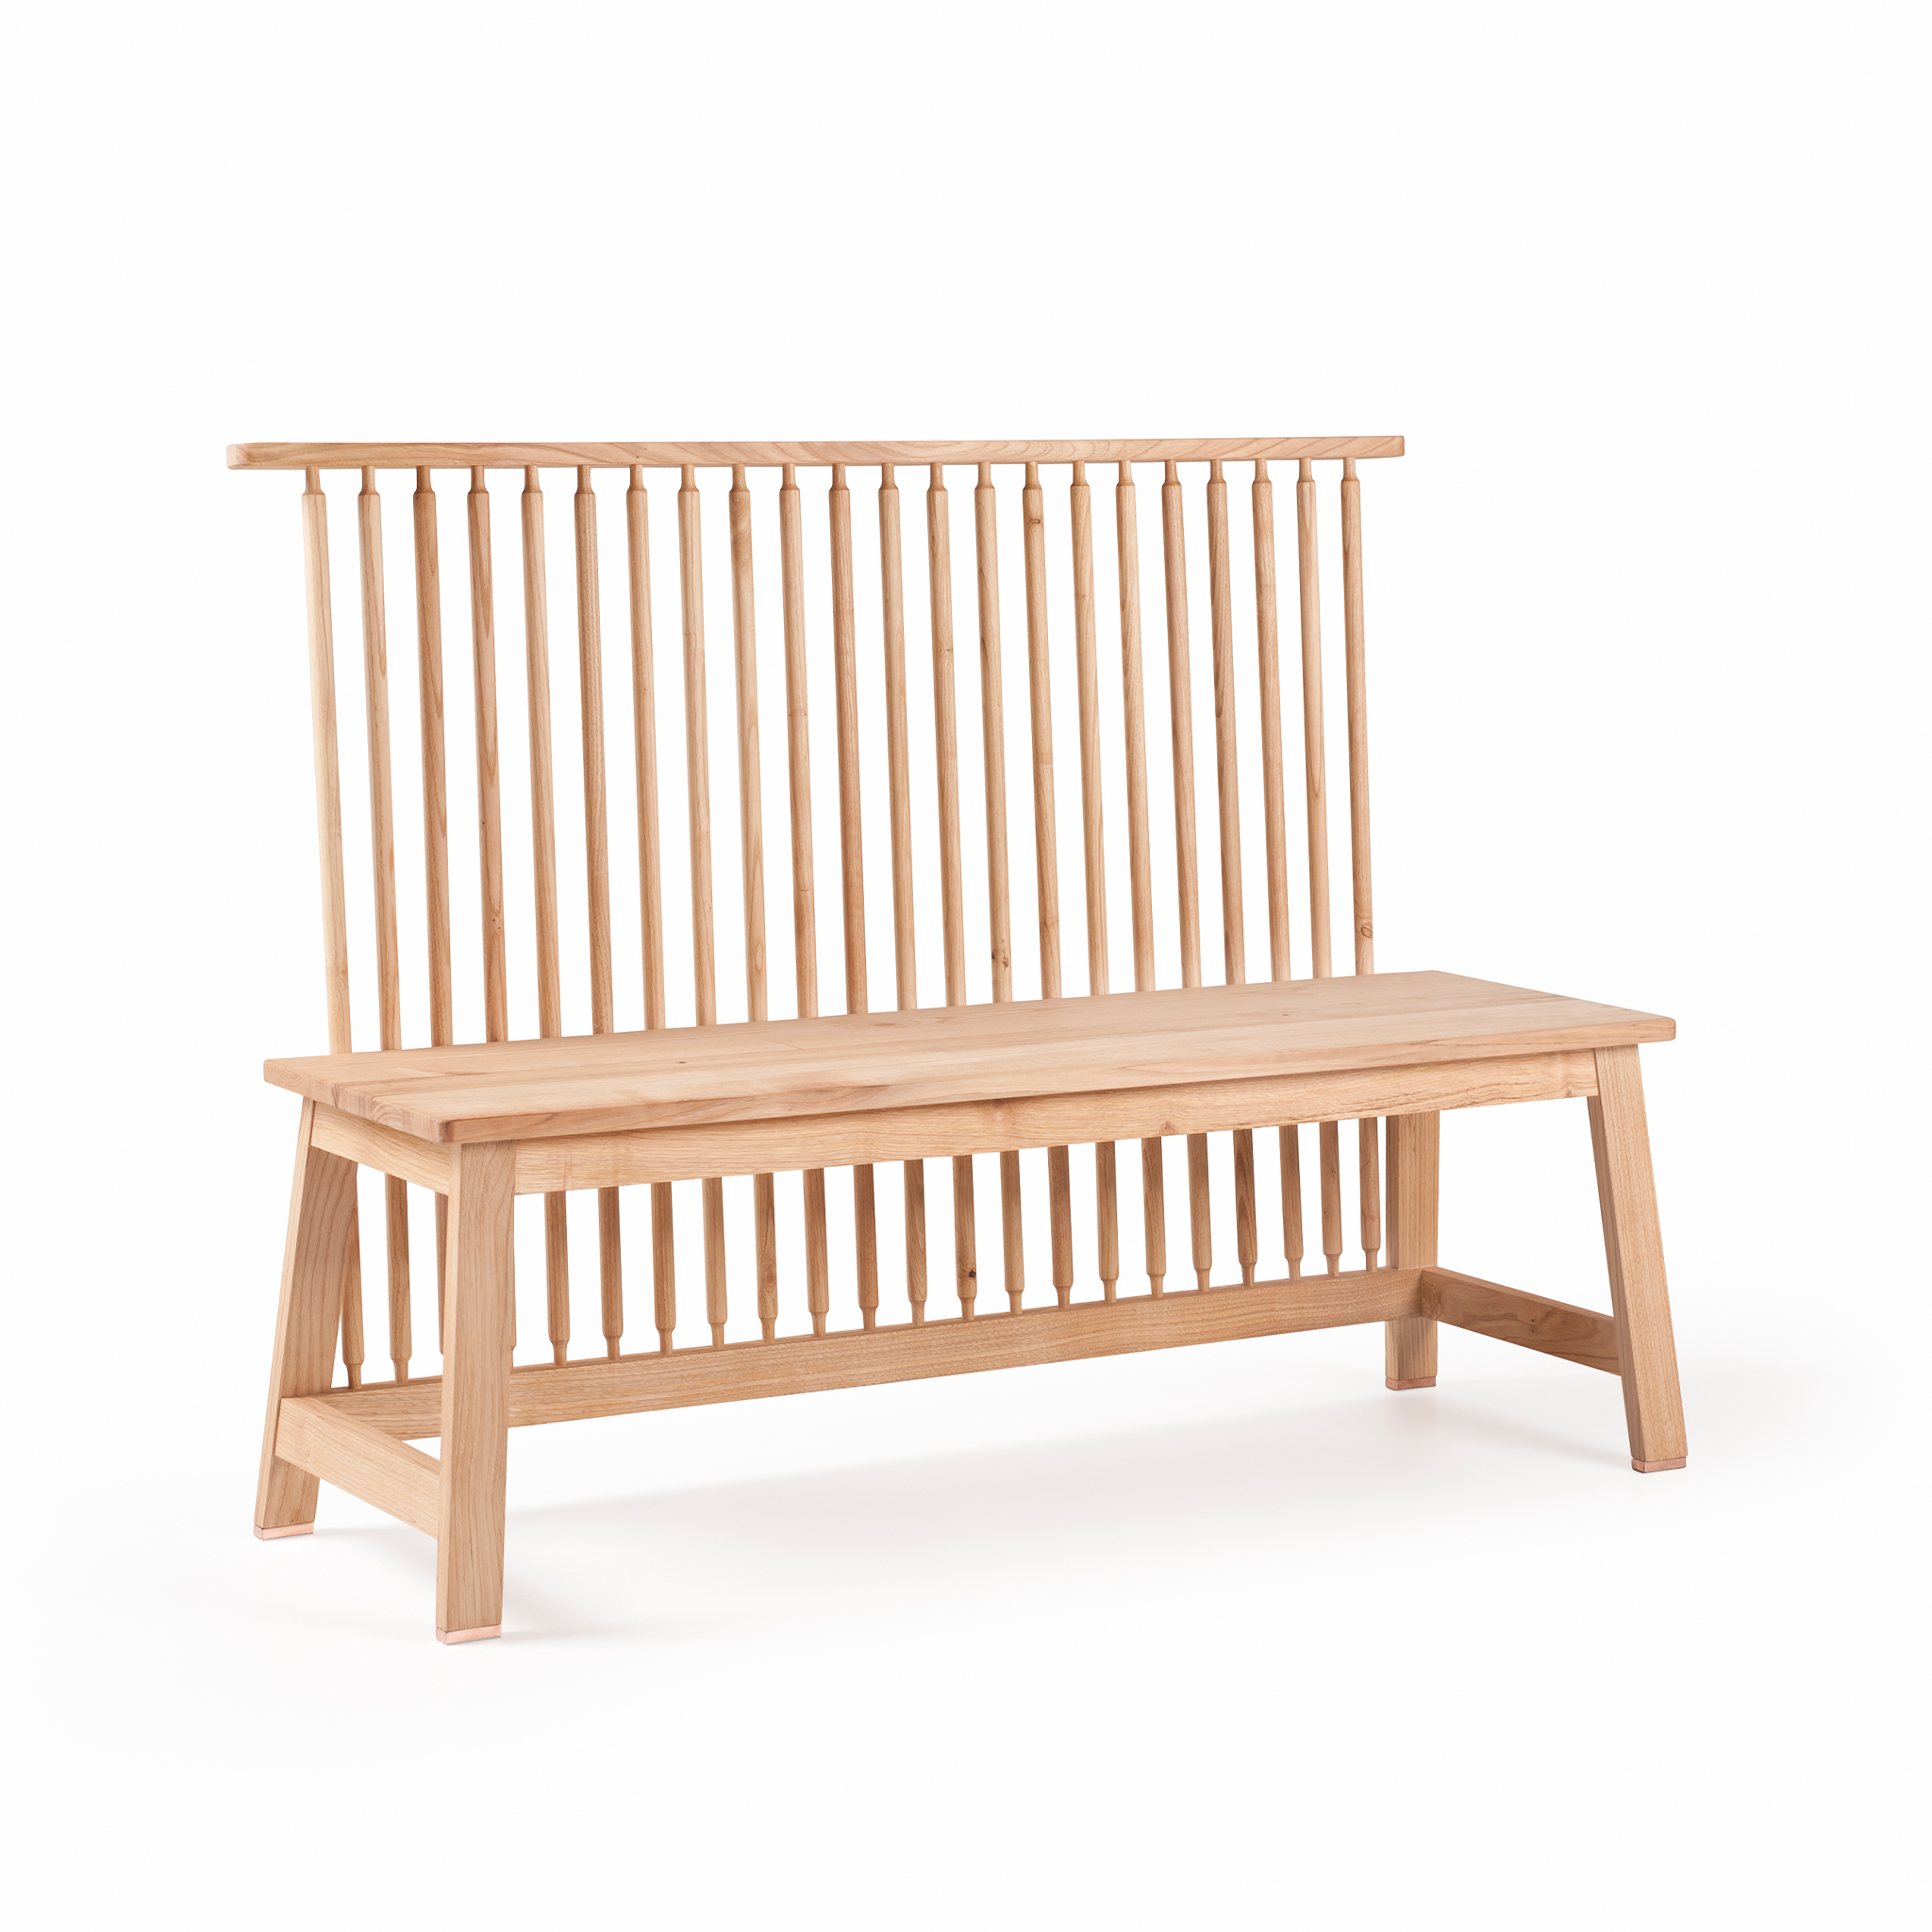 450 2-Seater Bench with Back by Ilse Crawford